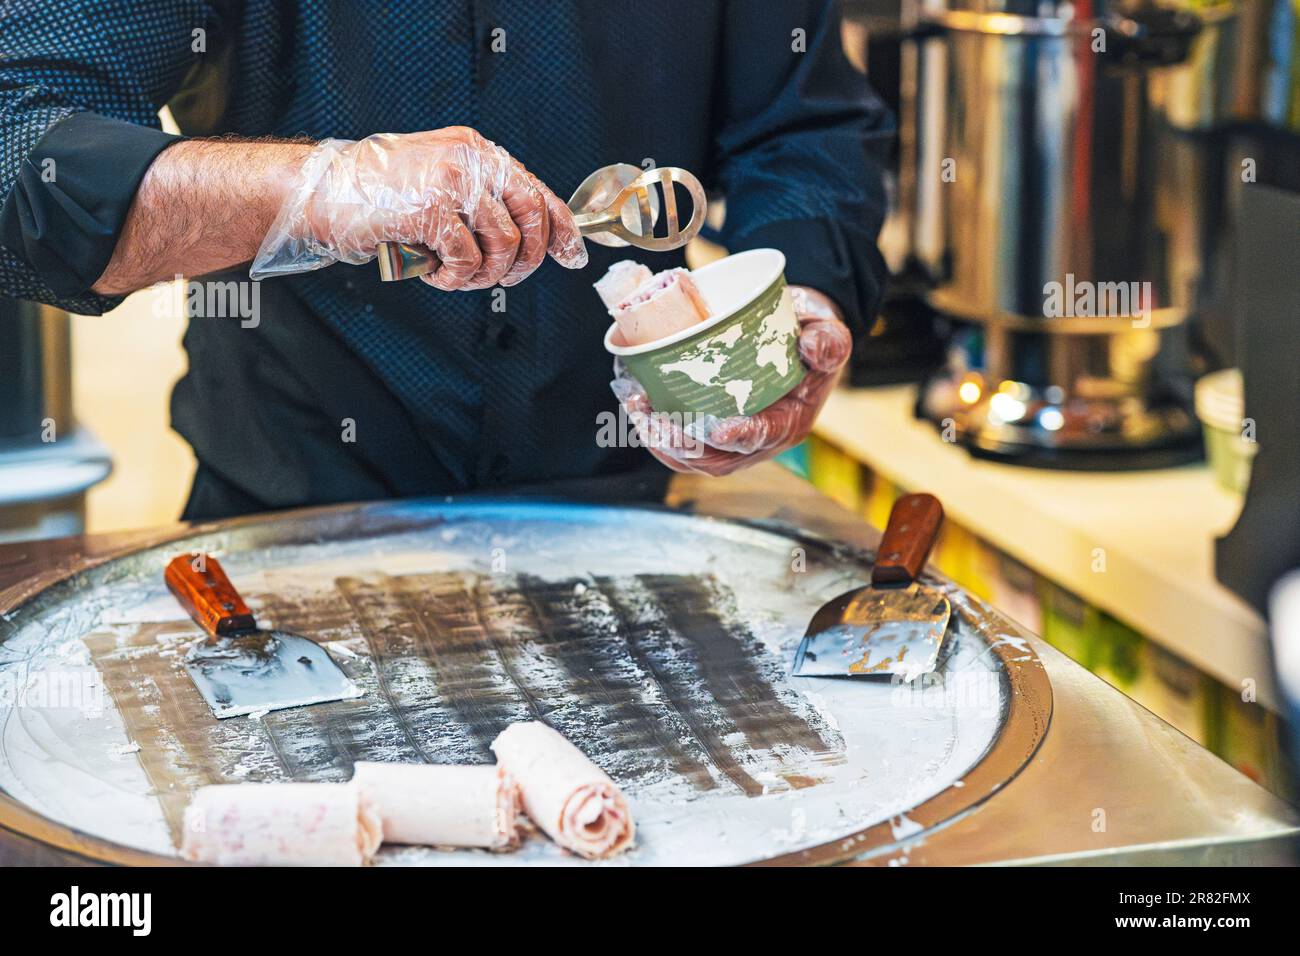 Making Rolled Ice Cream, Roll-Up Stock Photo